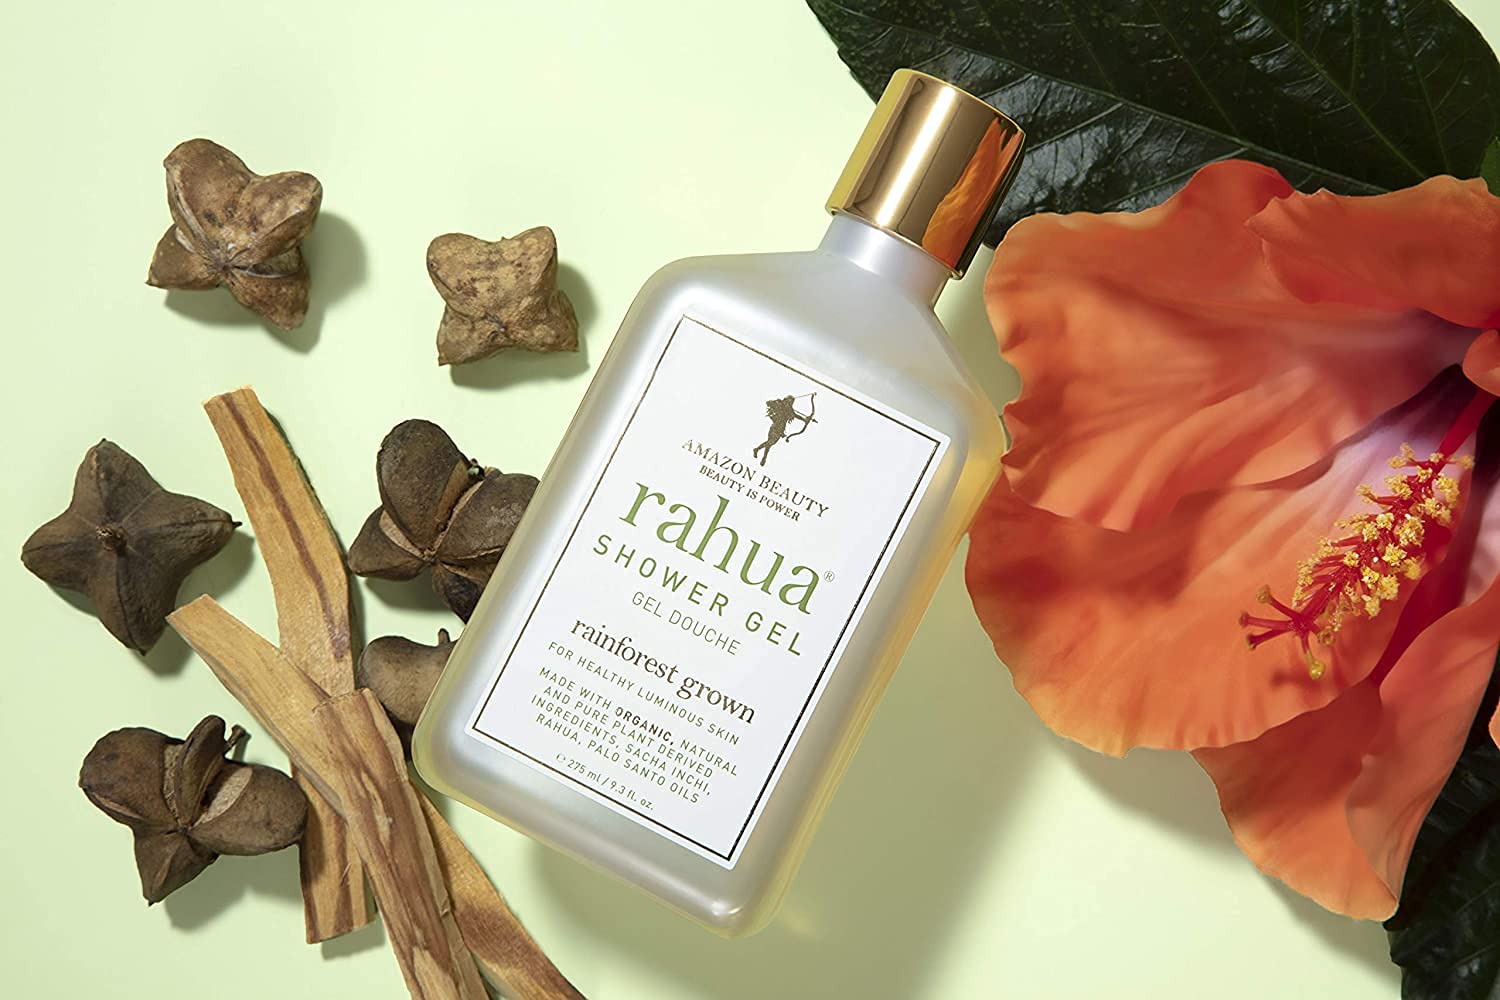 Rahua Shower Gel, 9.3 Fl Oz, Cruelty-Free, and Suitable for All Skin Types, Refreshing and Moisturizing Indulge in Luxurious Hydration.